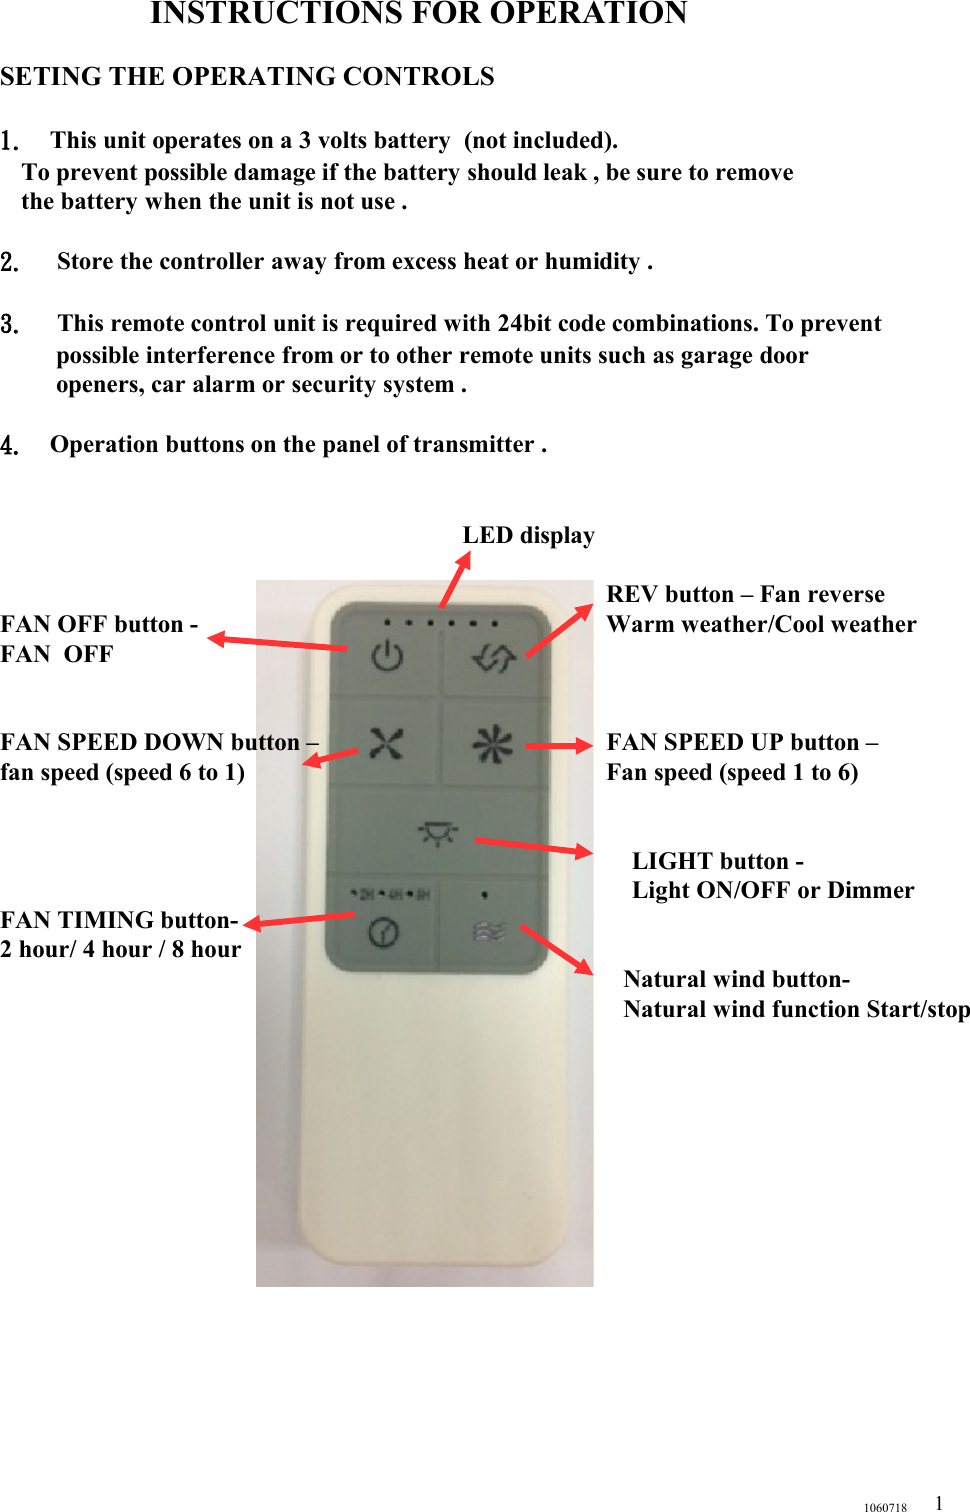 INSTRUCTIONS FOR OPERATIONSETING THE OPERATING CONTROLS1. This unit operates on a 3 volts battery  (not included).   To prevent possible damage if the battery should leak , be sure to remove   the battery when the unit is not use .2.  Store the controller away from excess heat or humidity .3.  This remote control unit is required with 24bit code combinations. To prevent possible interference from or to other remote units such as garage door openers, car alarm or security system .  4. Operation buttons on the panel of transmitter .                    LED display                 REV button – Fan reverseFAN OFF button -                        Warm weather/Cool weatherFAN  OFF                                                                                         FAN SPEED DOWN button –                                              FAN SPEED UP button –  fan speed (speed 6 to 1)                                                          Fan speed (speed 1 to 6)                                                                                     LIGHT button -                                                                                      Light ON/OFF or Dimmer              FAN TIMING button-2 hour/ 4 hour / 8 hour                                                                                                                                                     Natural wind button-                                                                                         Natural wind function Start/stop                                                                                                                                                                                                                                                                    10607181